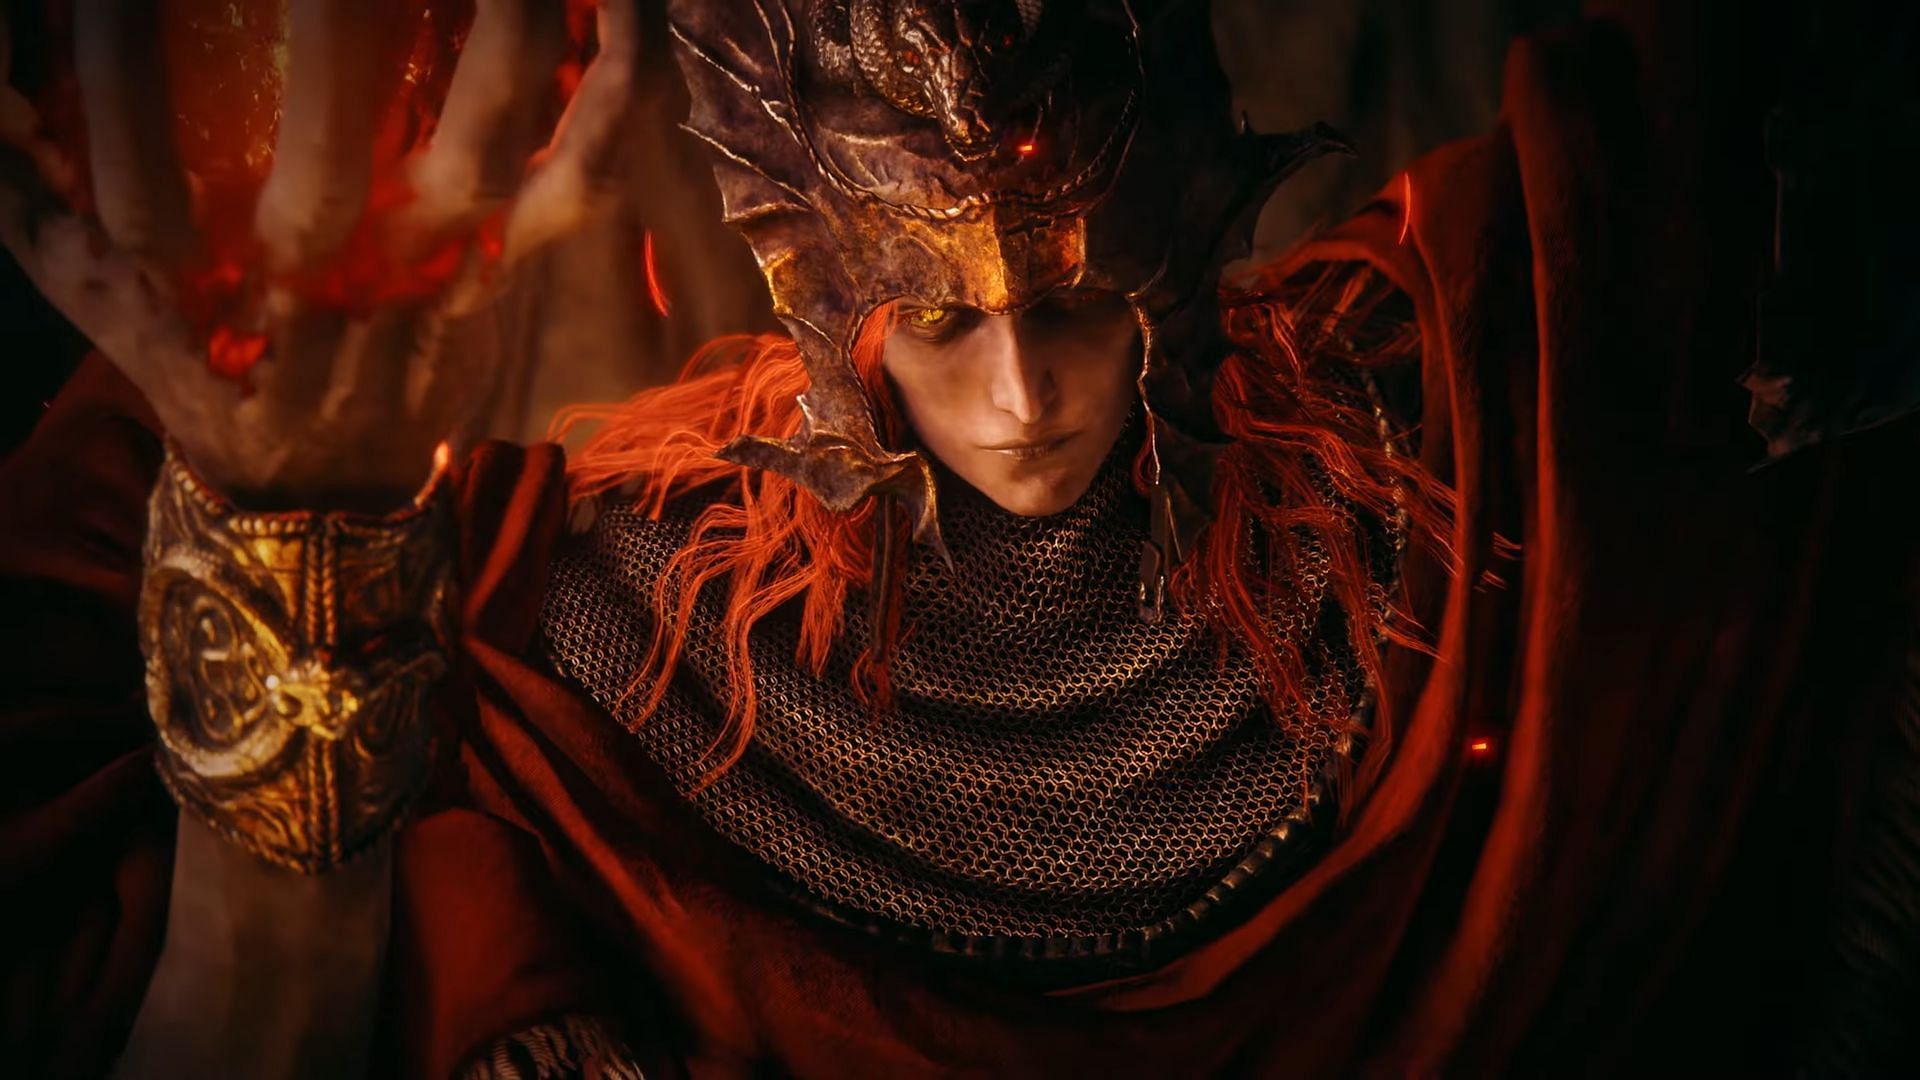 Here are five things you might have missed in the Elden Ring Shadow of the Erdtree trailer